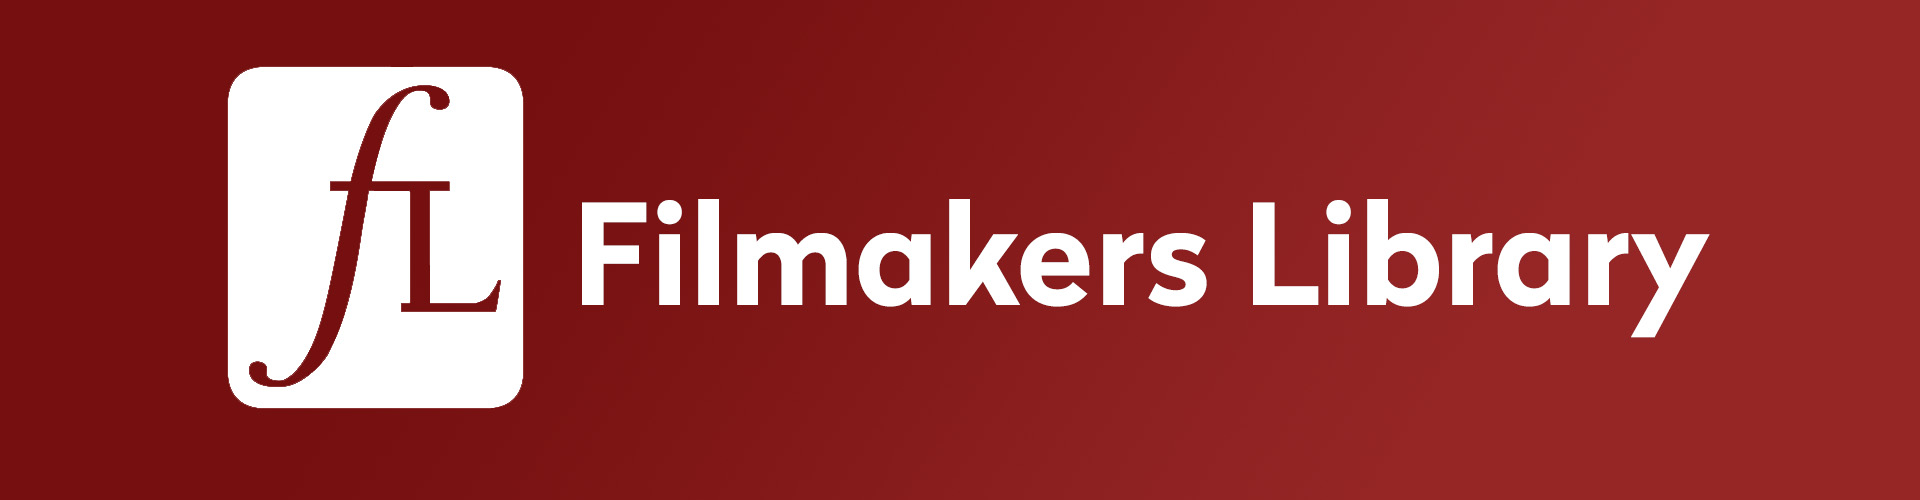 Image for Filmakers Library, Inc